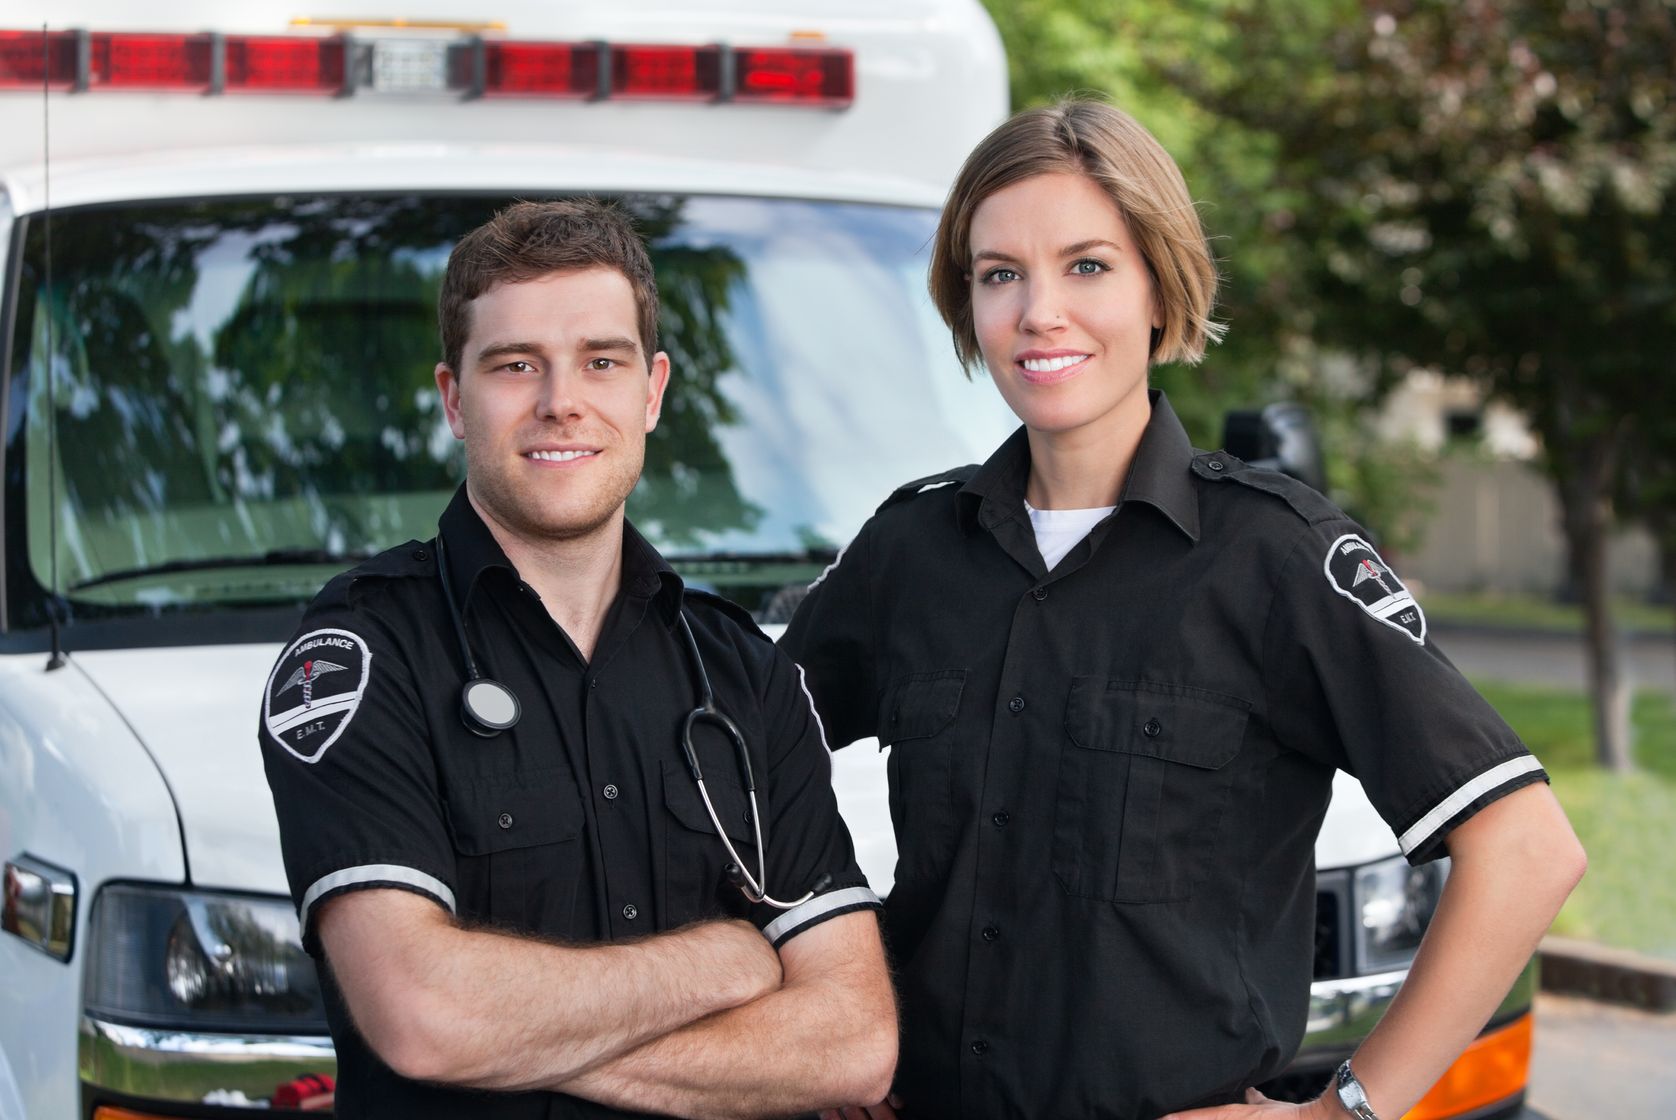 Earning Your EMT Diploma with HCI